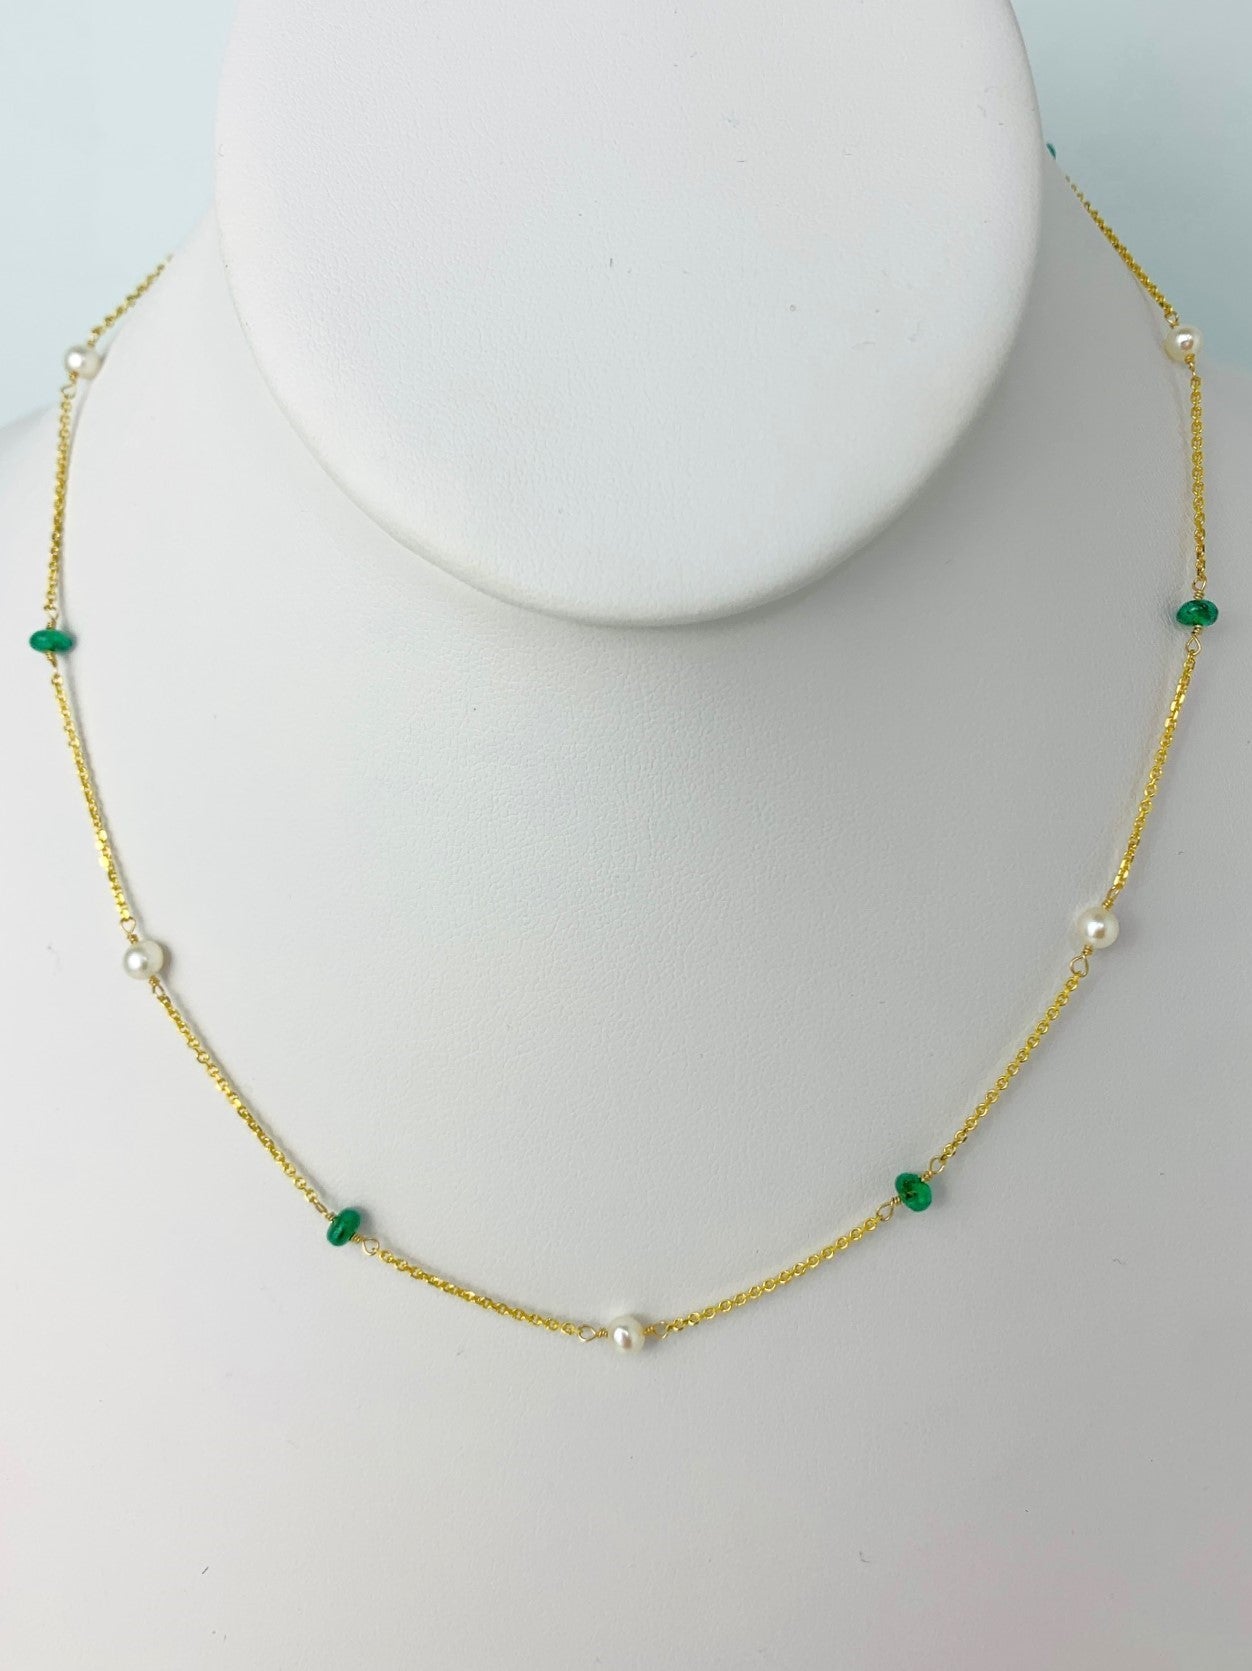 emerald beads and white round pearls in stations around a yellow gold chain